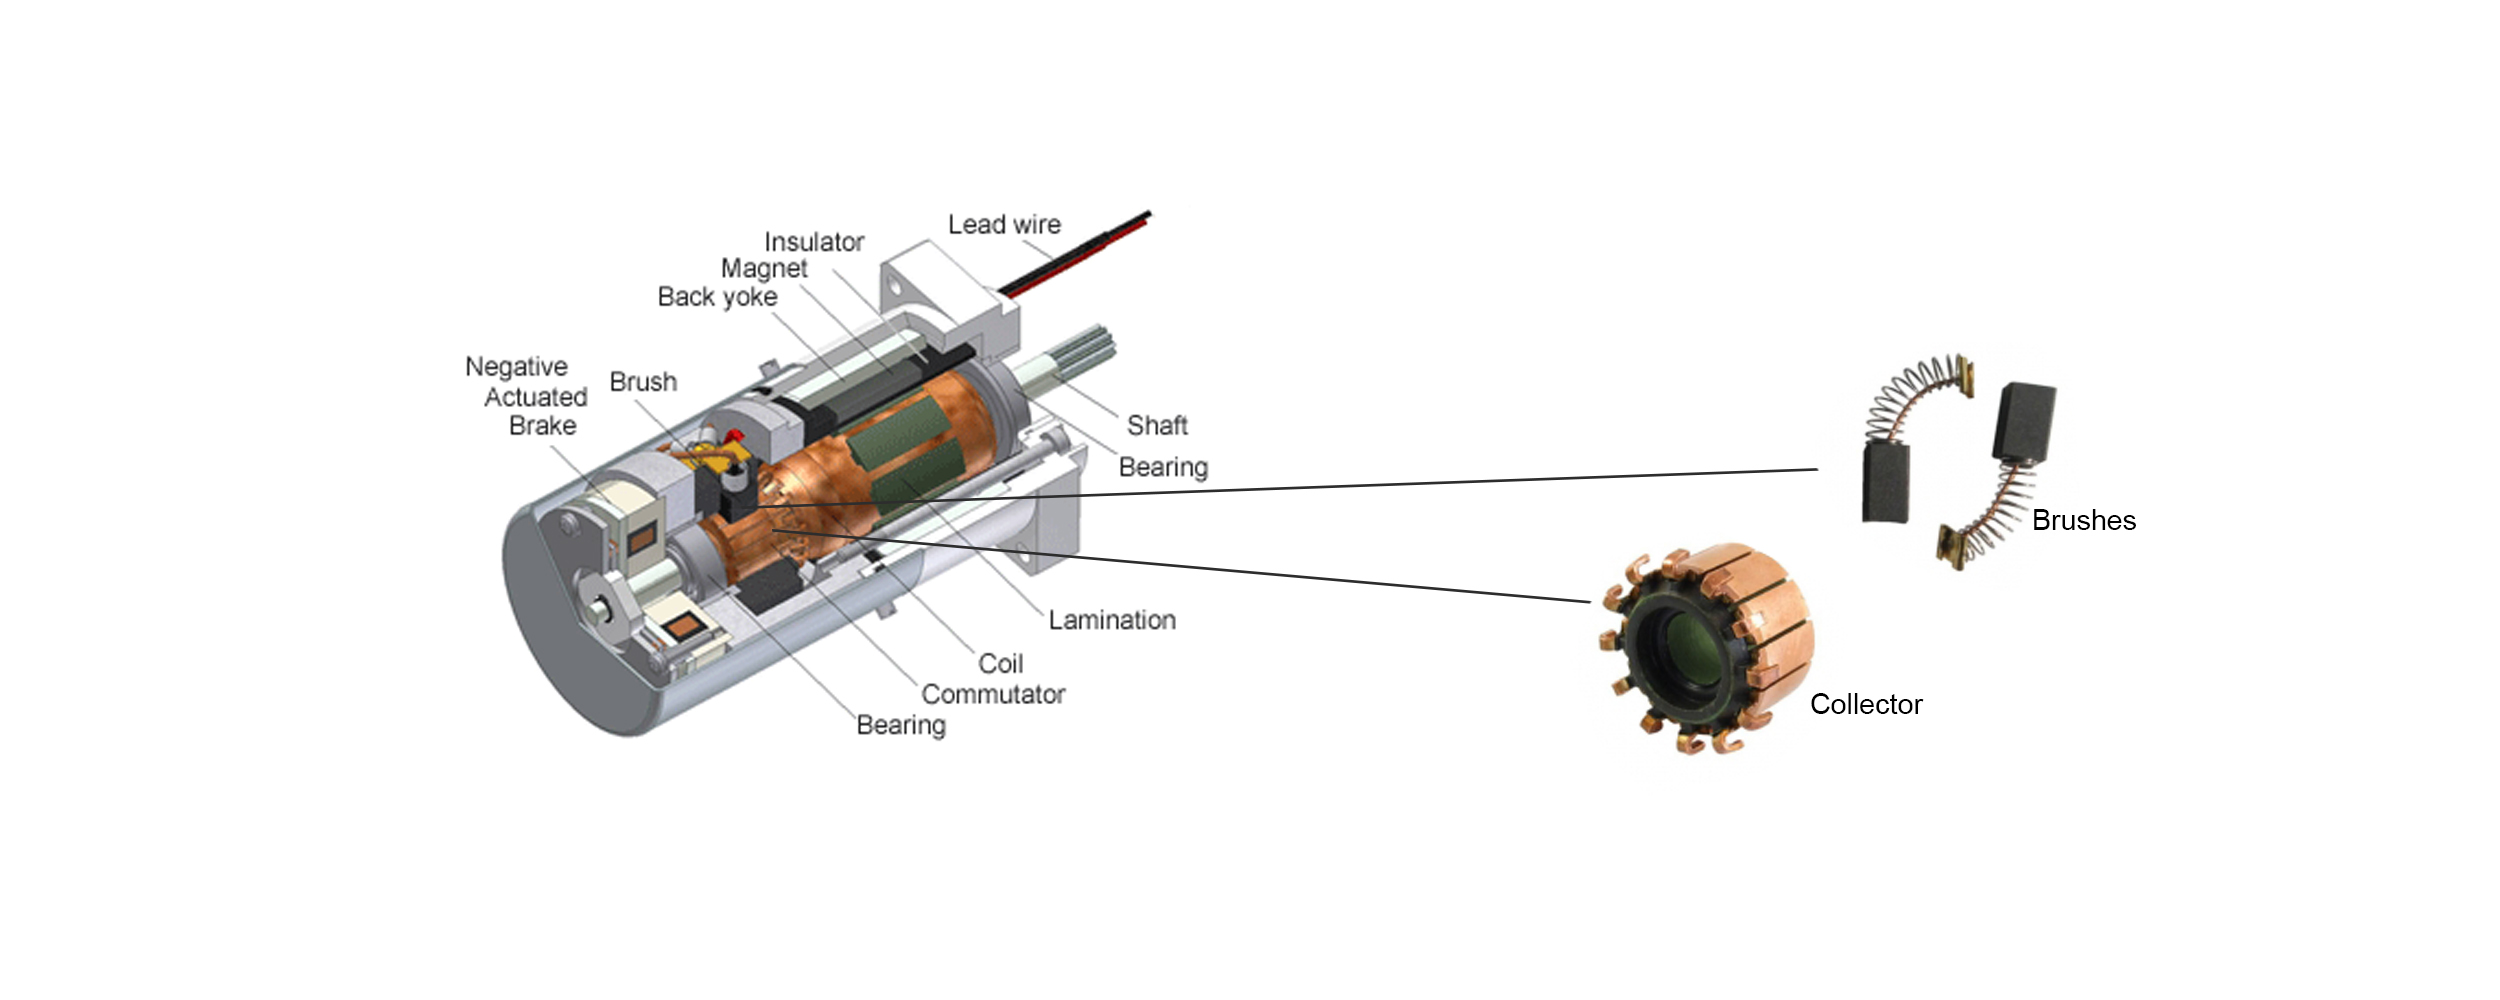 Brushless Vs Brushed DC Motors: When and Why to Choose One Over